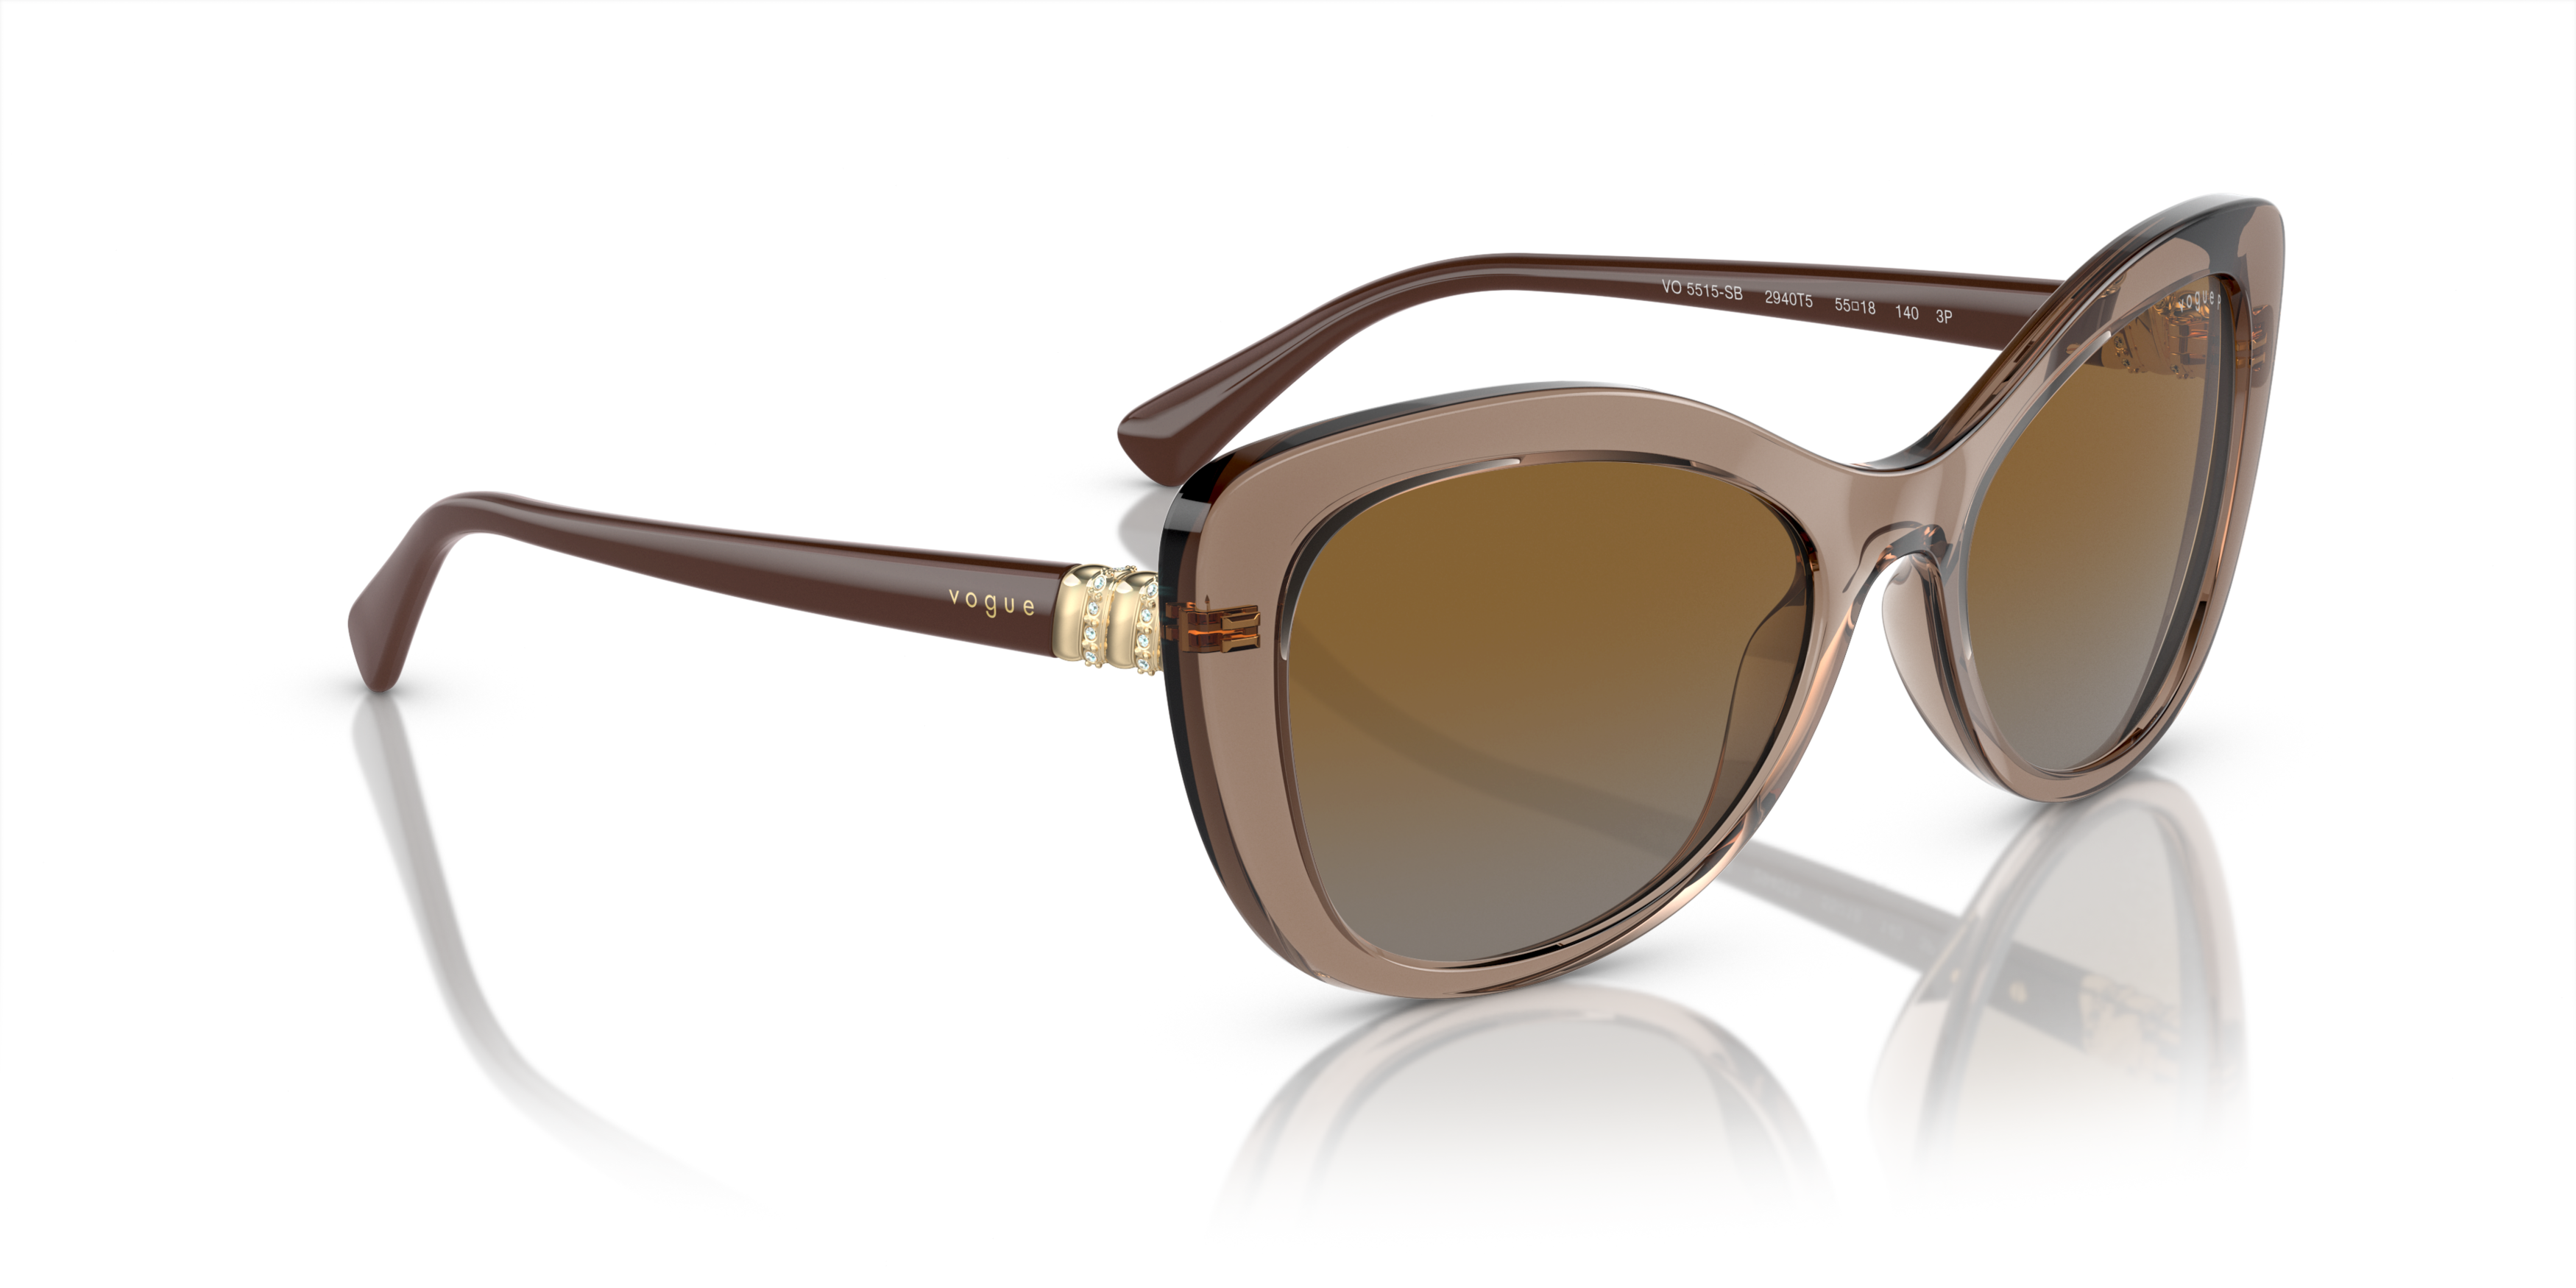 [products.image.angle_right01] Vogue Eyewear VO5515SB 2940T5